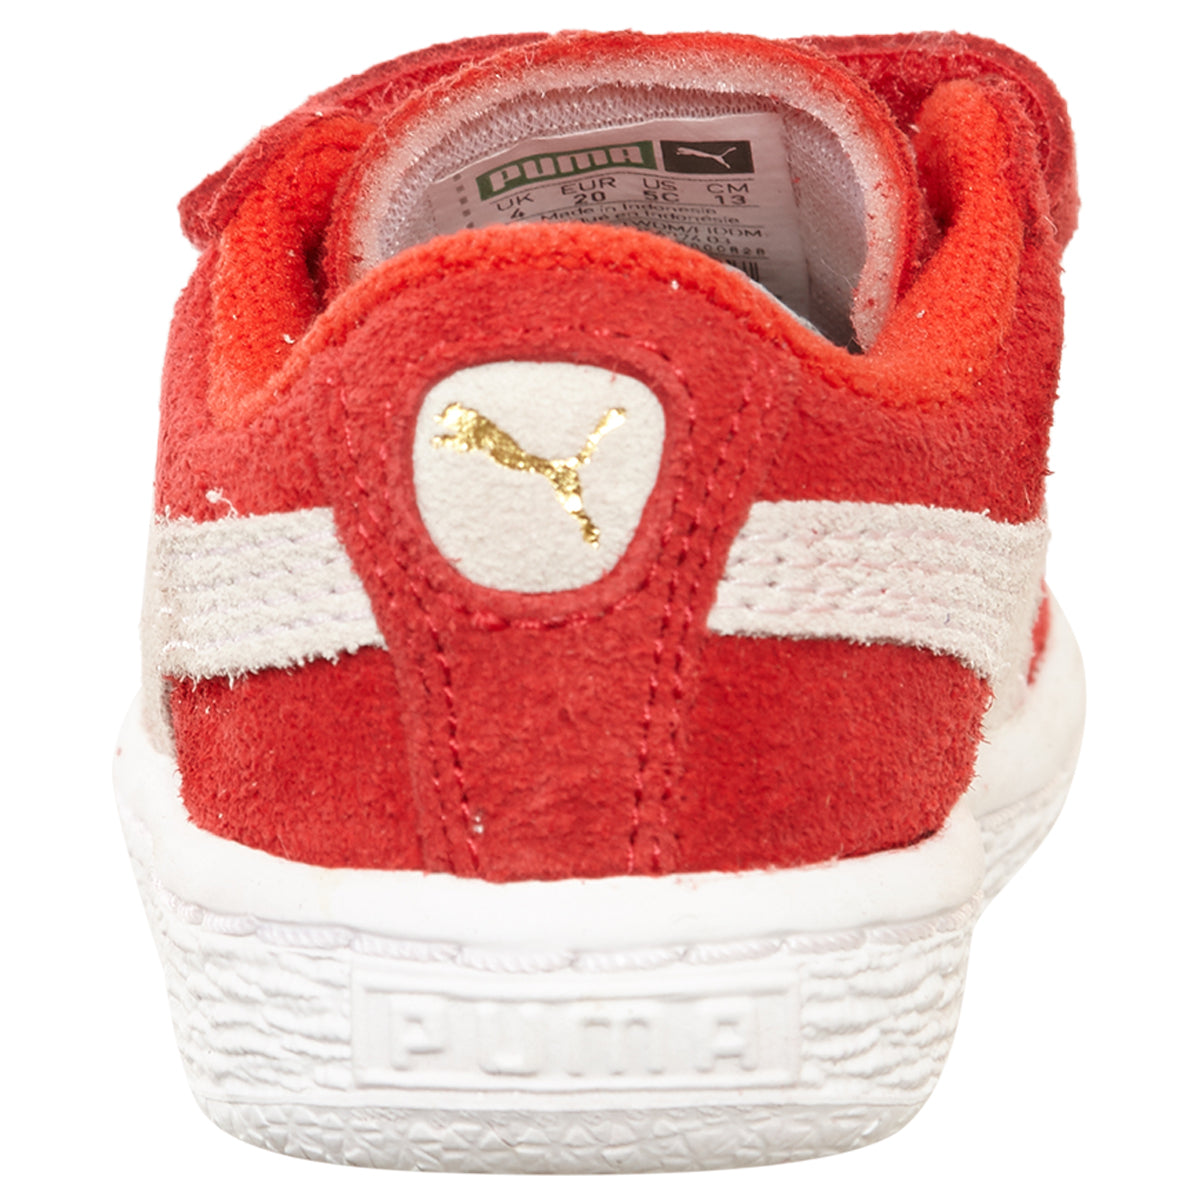 Puma Suede 2 Straps Toddlers Style : 356274